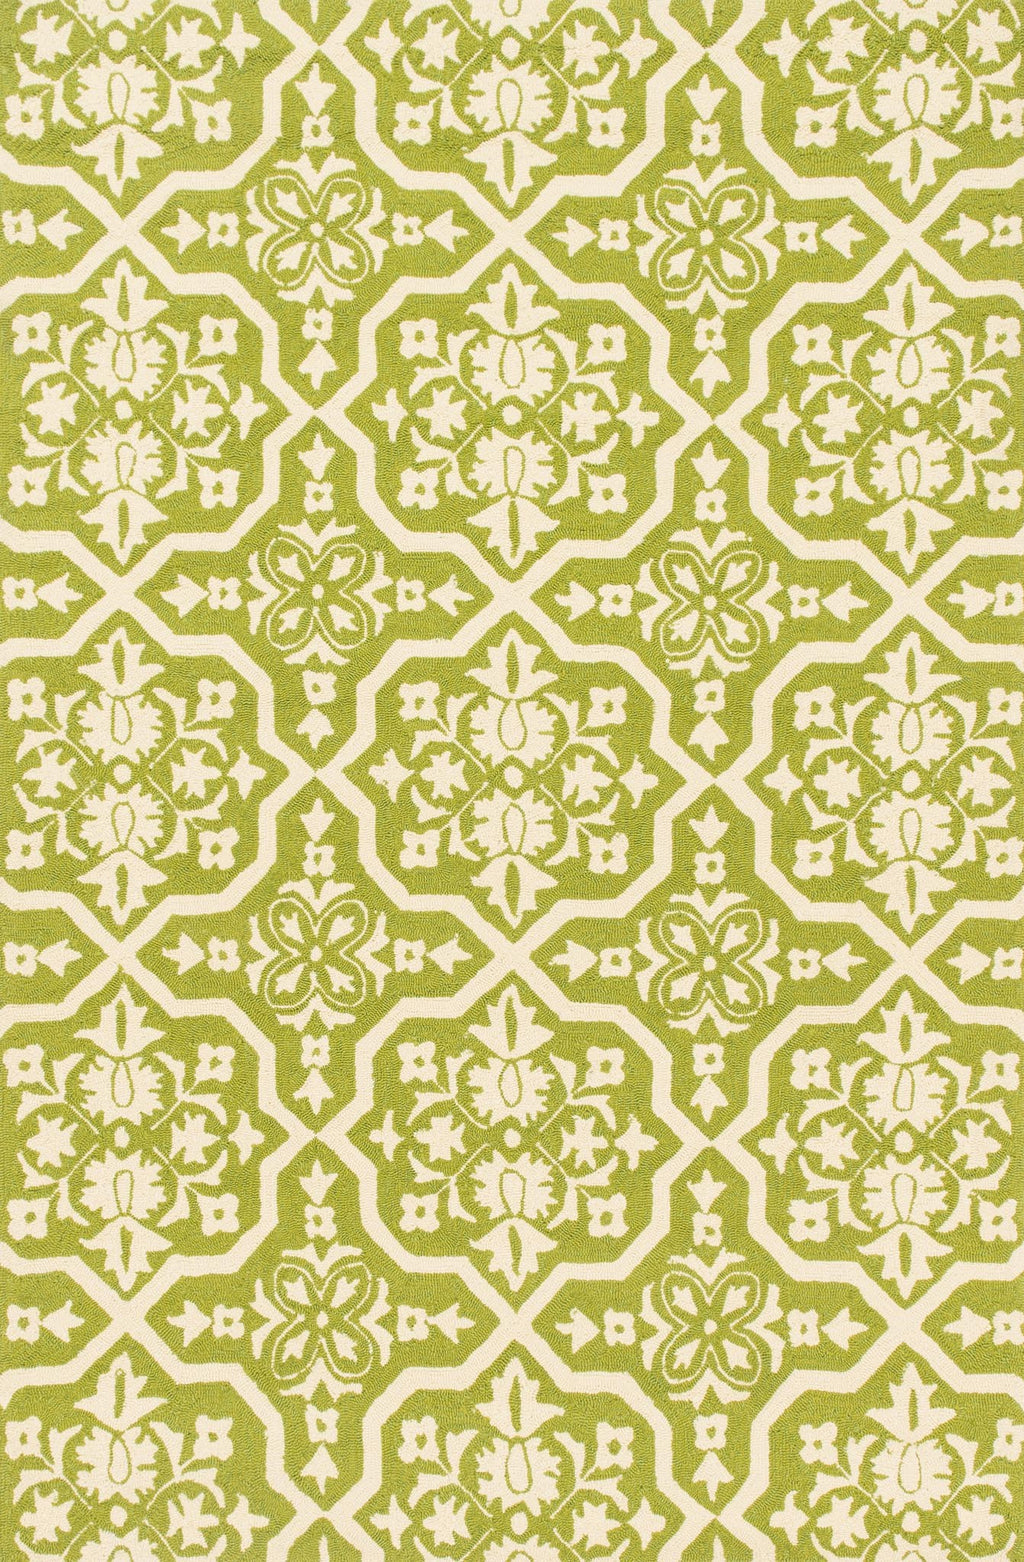 VENICE BEACH Collection Rug  in  PERIDOT / IVORY Green Small Hand-Hooked Polypropylene